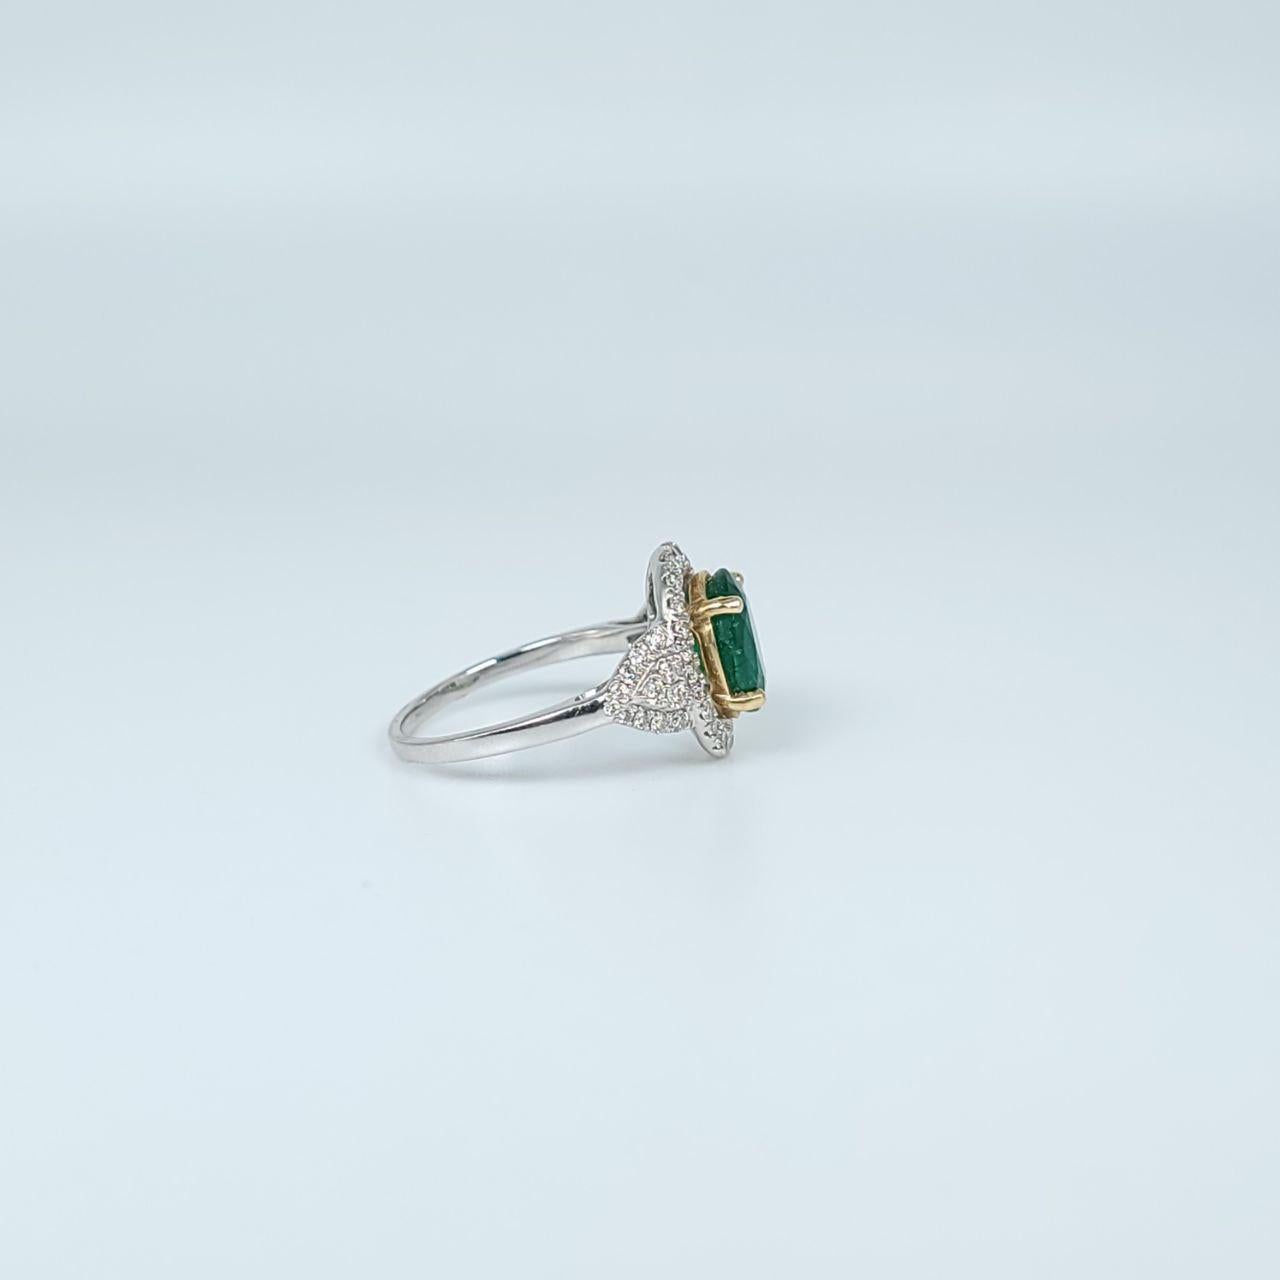 Emerald Diamond Ring Cocktail Diamond Ring with Large Brazilian Emerald For Sale 4